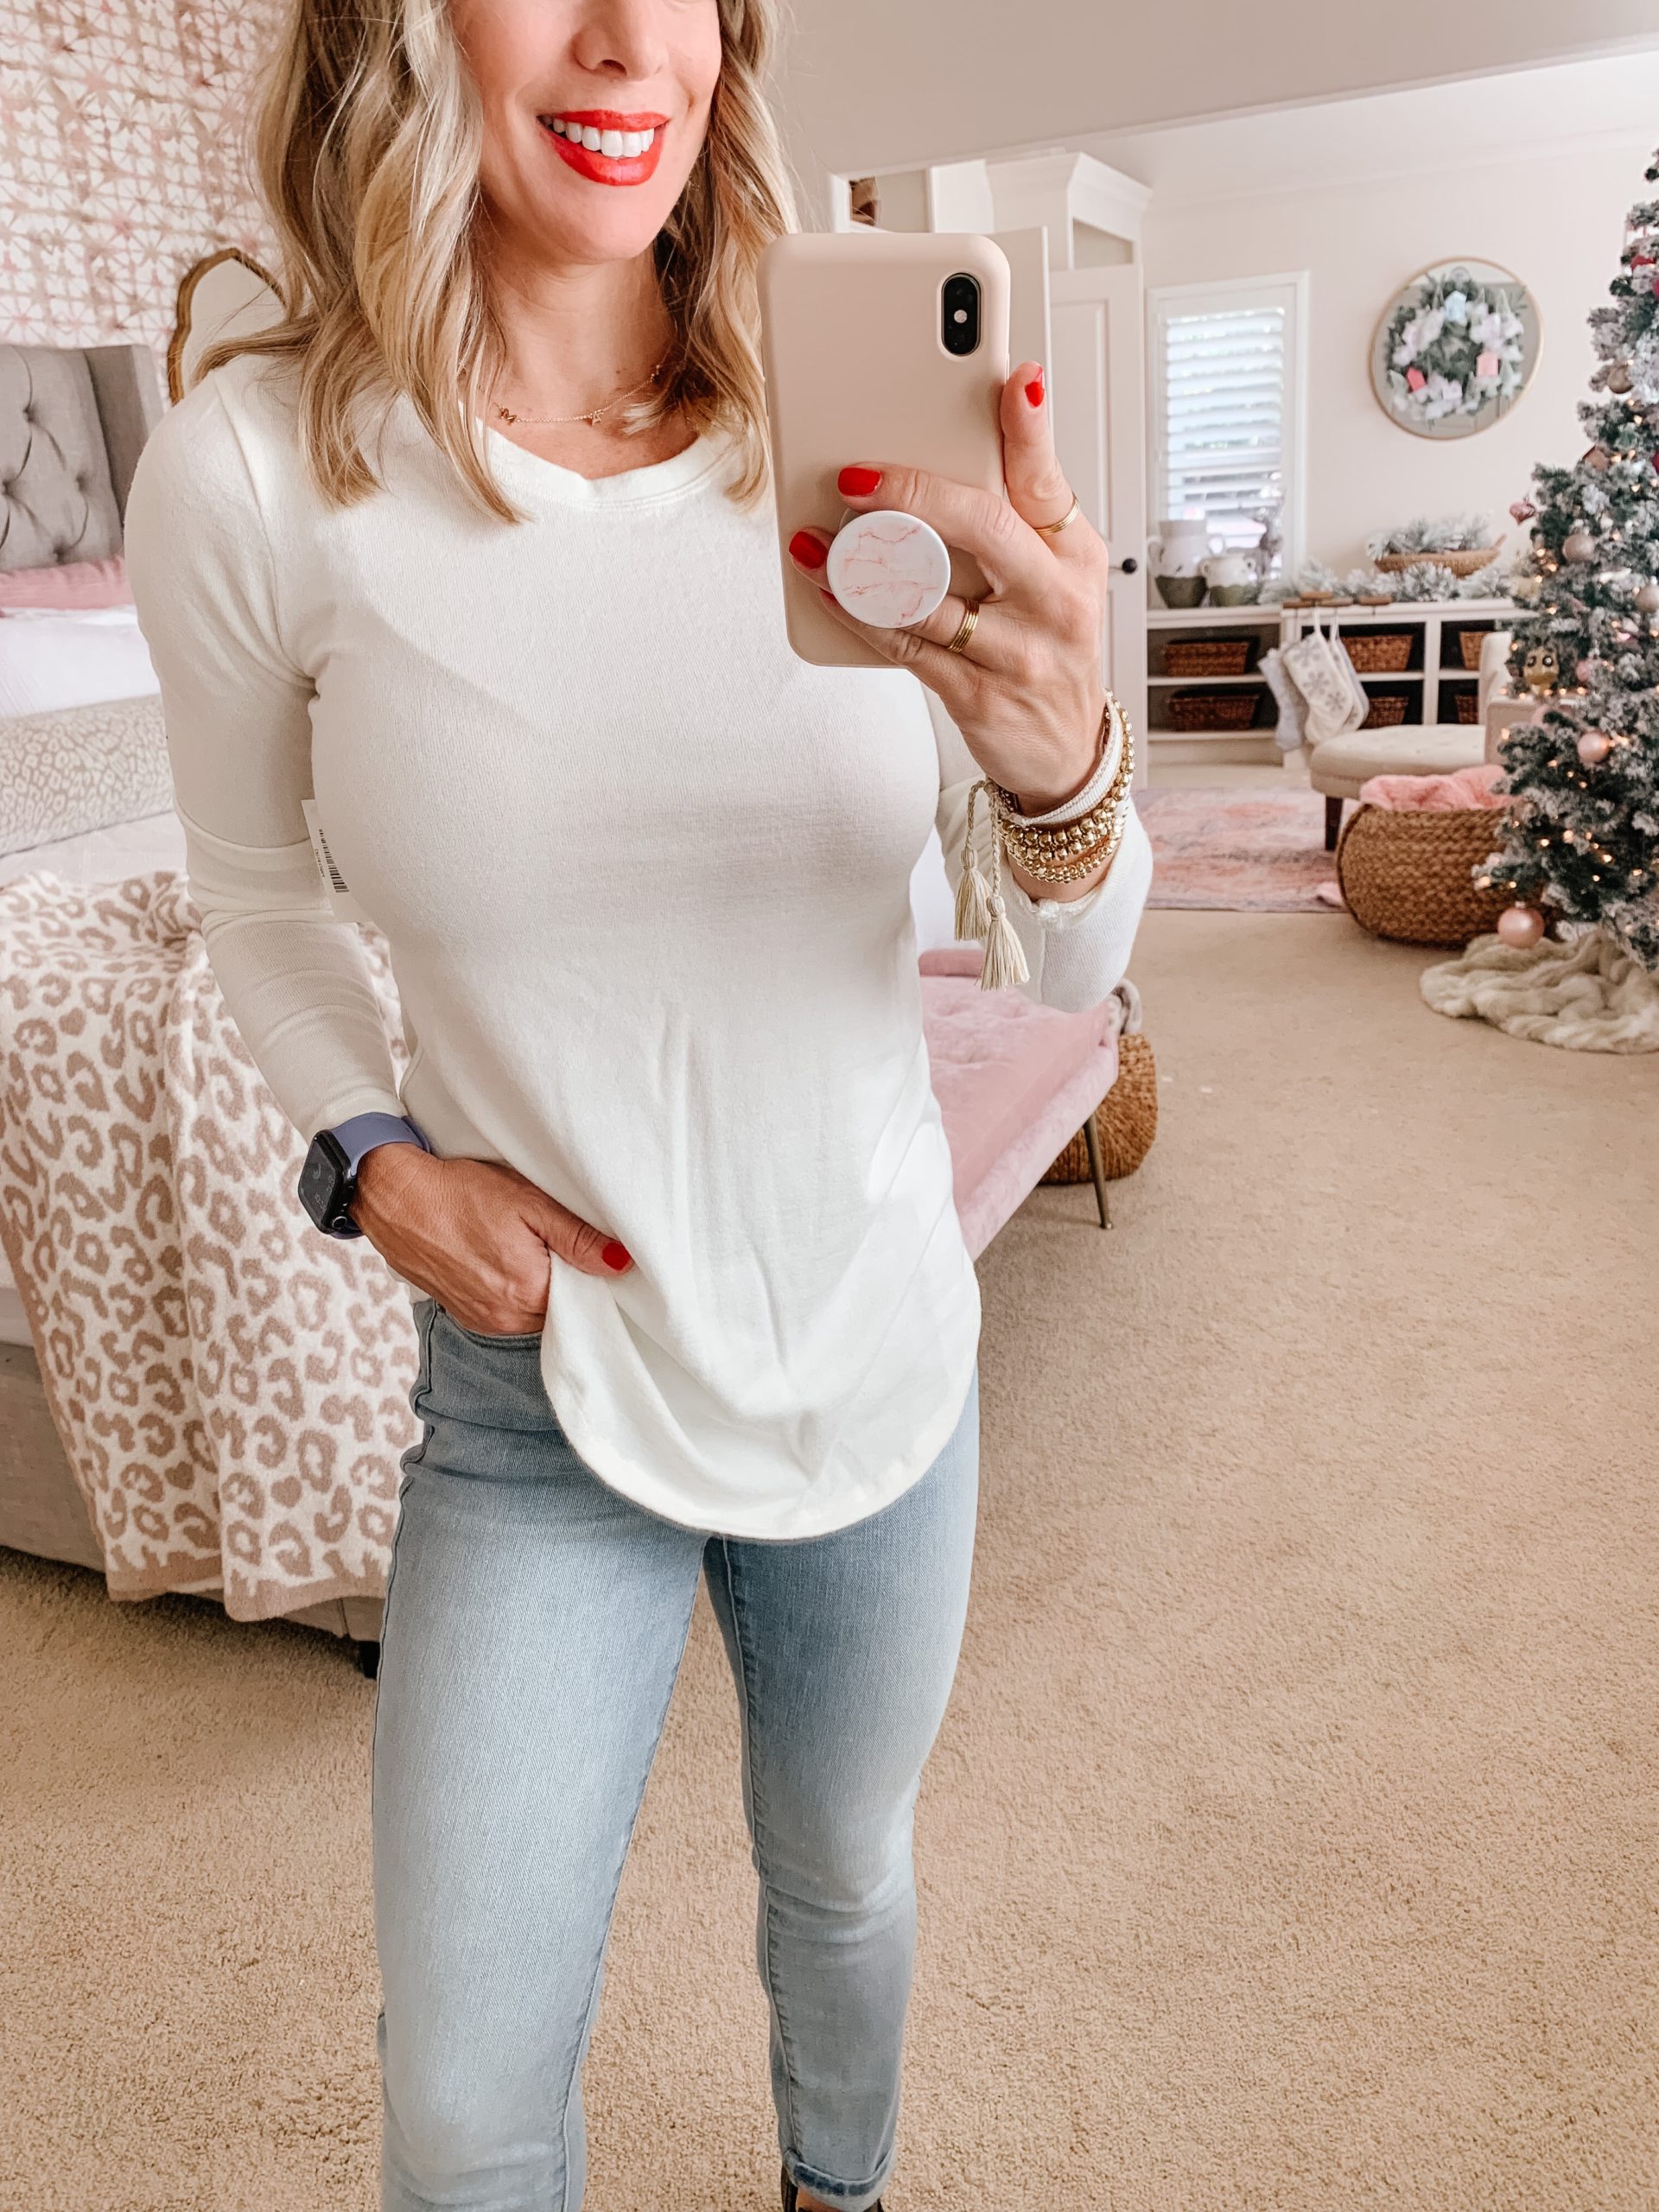 Amazon Fashion Finds, Crew Neck Tee, Jeans, Booties 